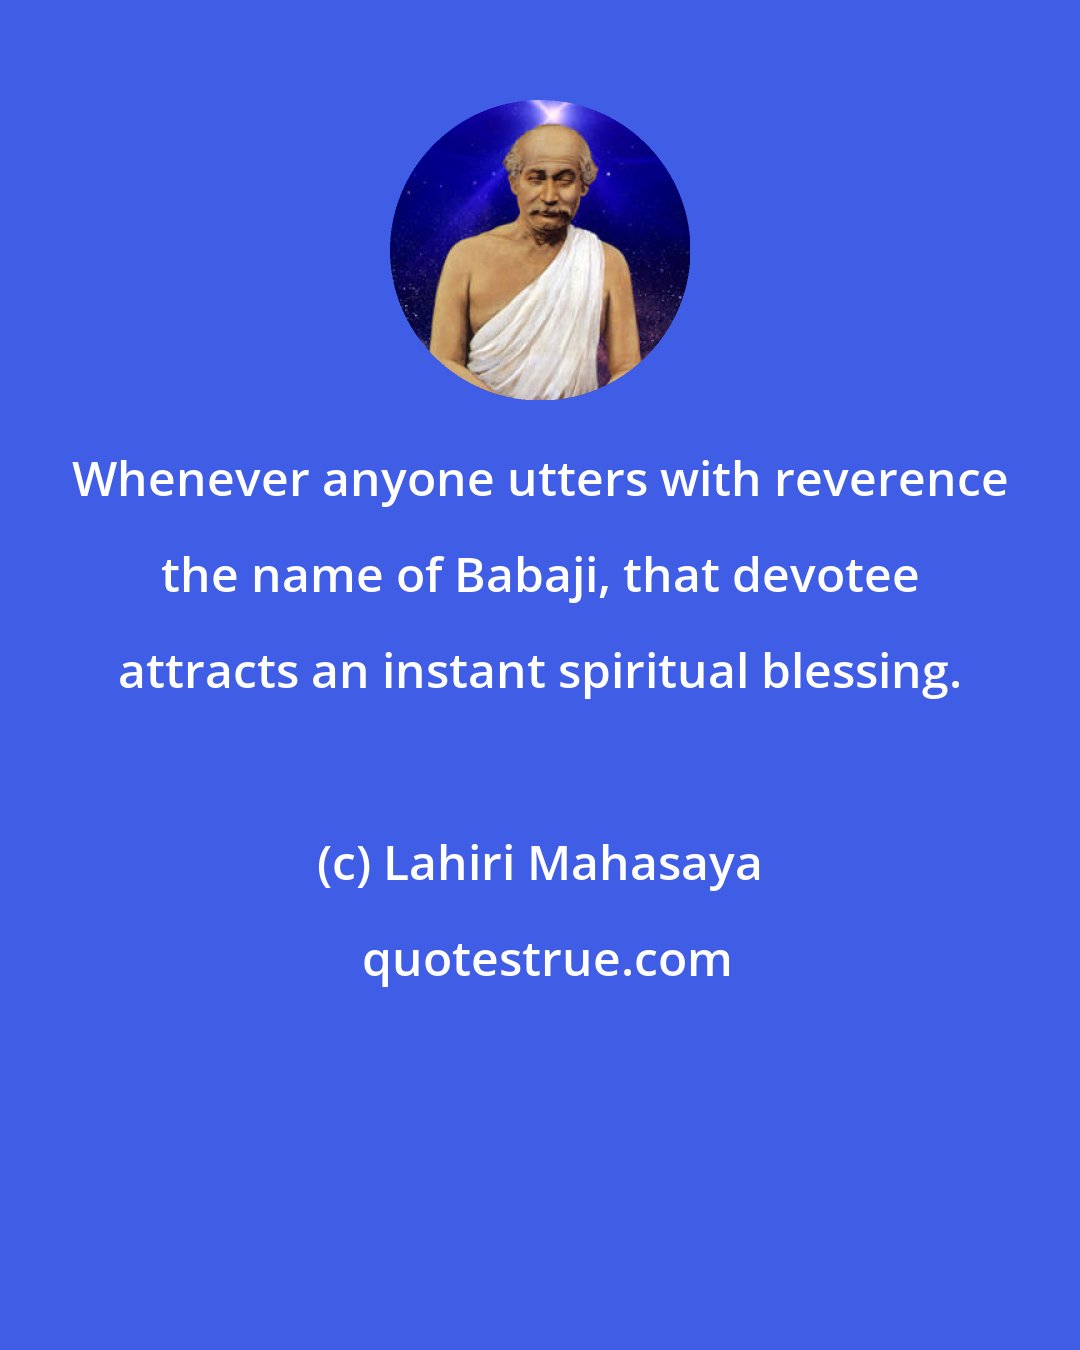 Lahiri Mahasaya: Whenever anyone utters with reverence the name of Babaji, that devotee attracts an instant spiritual blessing.